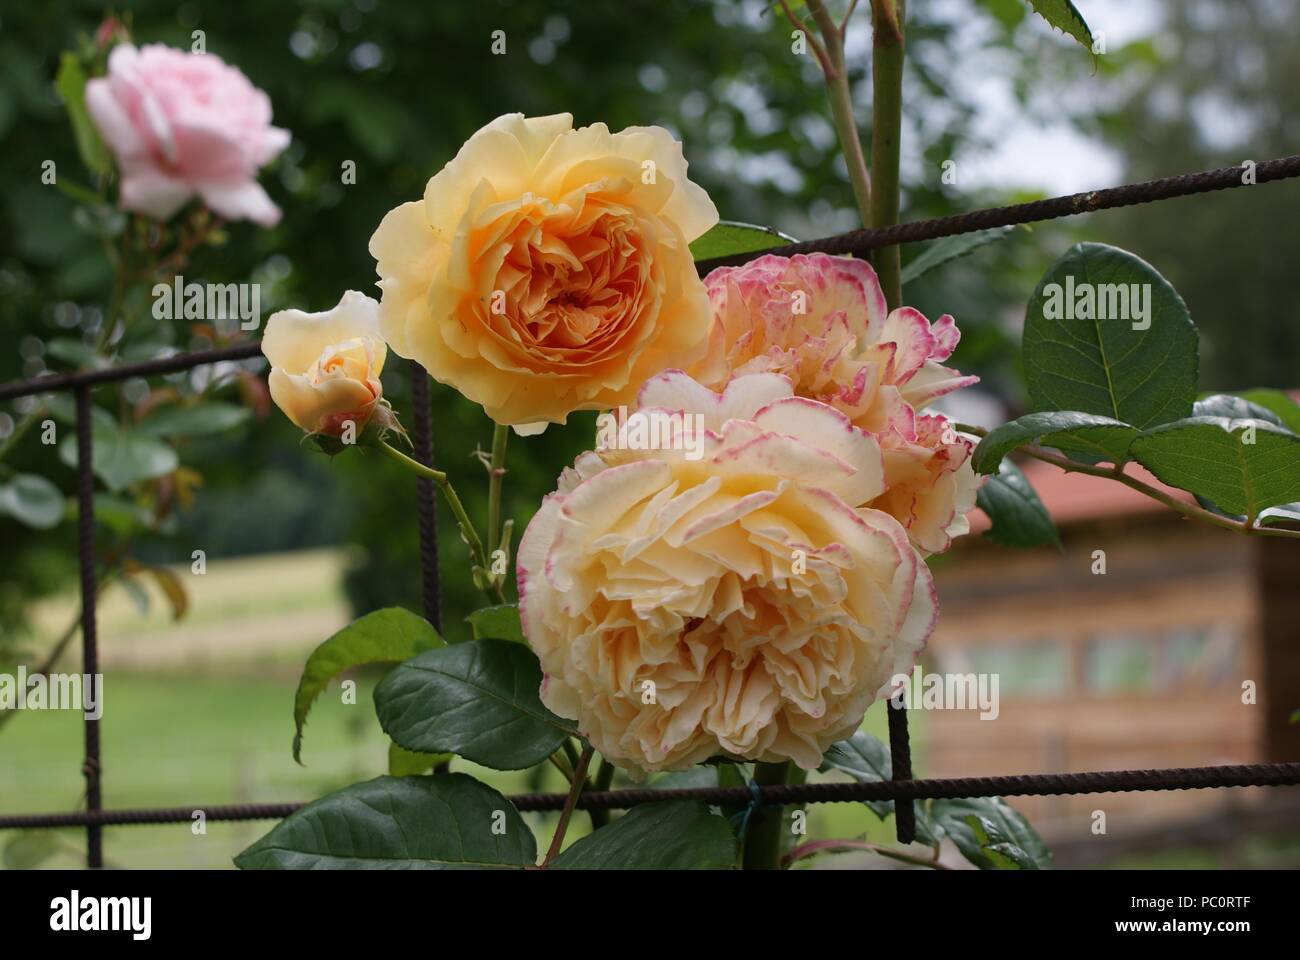 The climbing rose “Crown Princess Margareta” in a lovely shade of apricot-orange  Stock Photo - Alamy